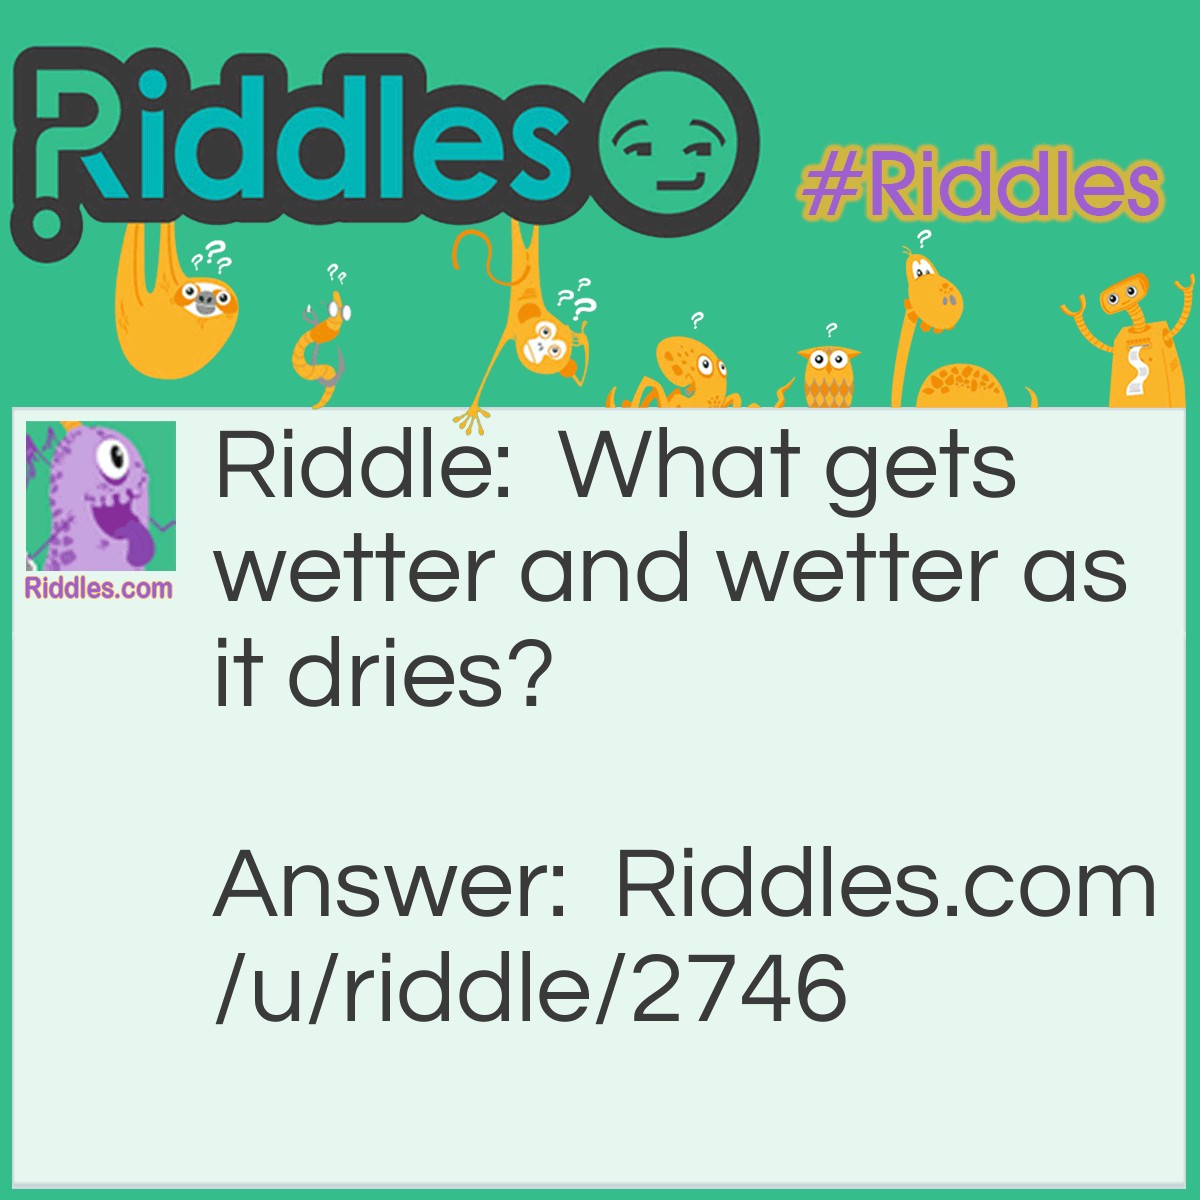 Riddle: What gets wetter and wetter as it dries? Answer: A towel.